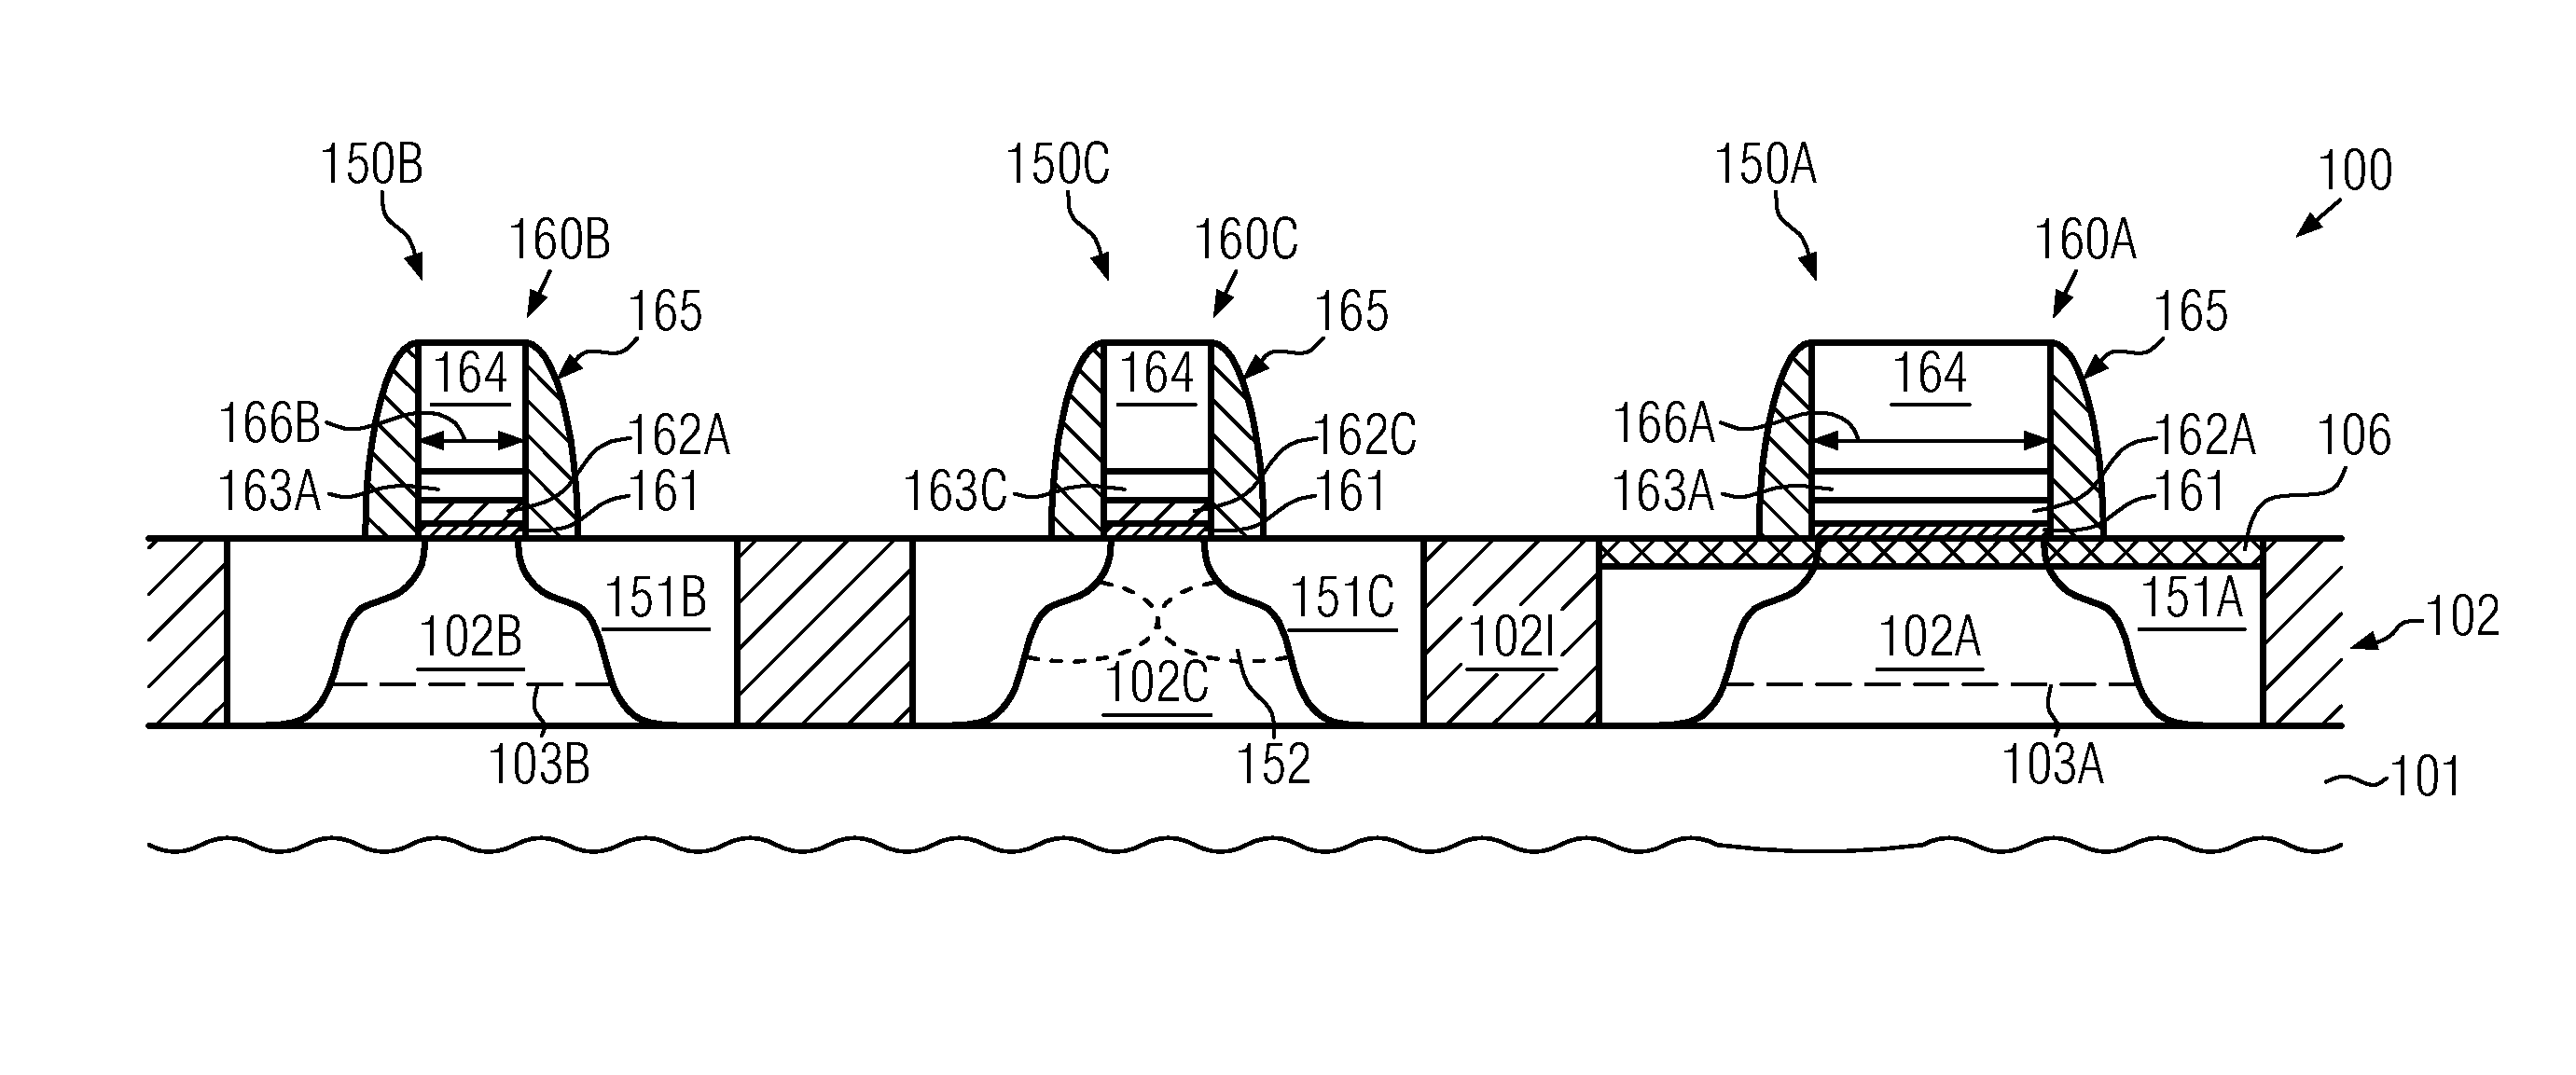 Differential threshold voltage adjustment in PMOS transistors by differential formation of a channel semiconductor material